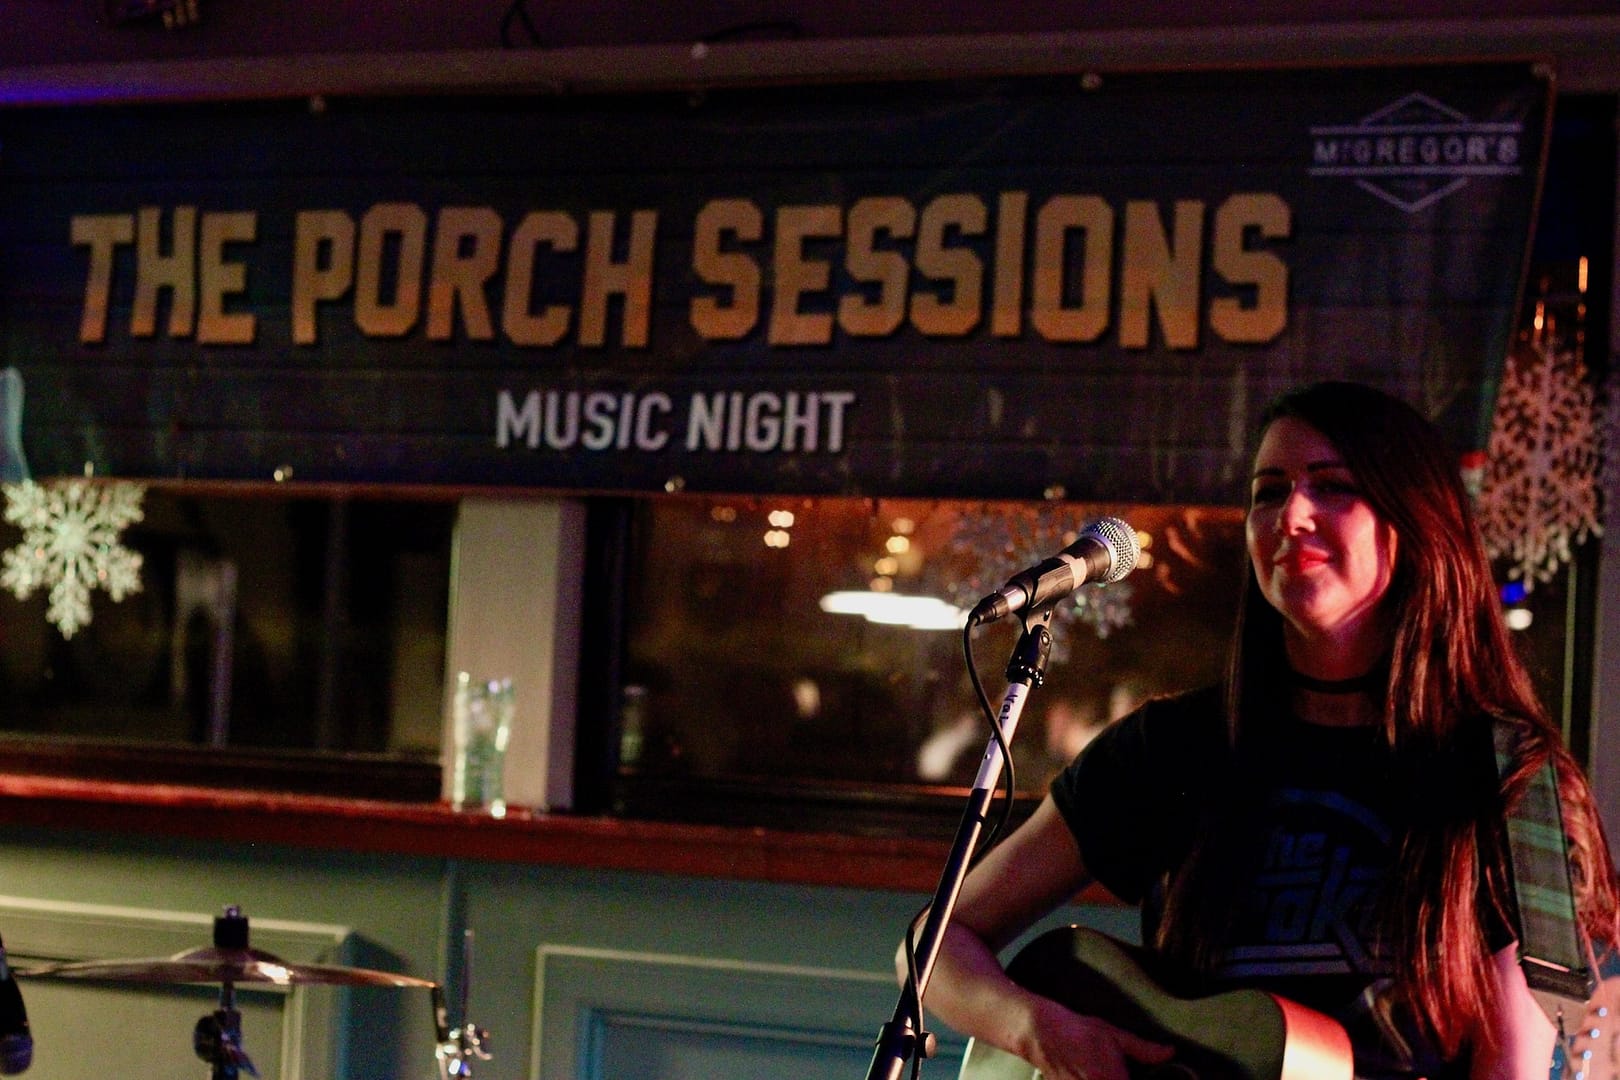 Lauren MacKenzie at The Porch Sessions Inverness December 20183016 - The Porch Sessions, 8/12/2018 - Images